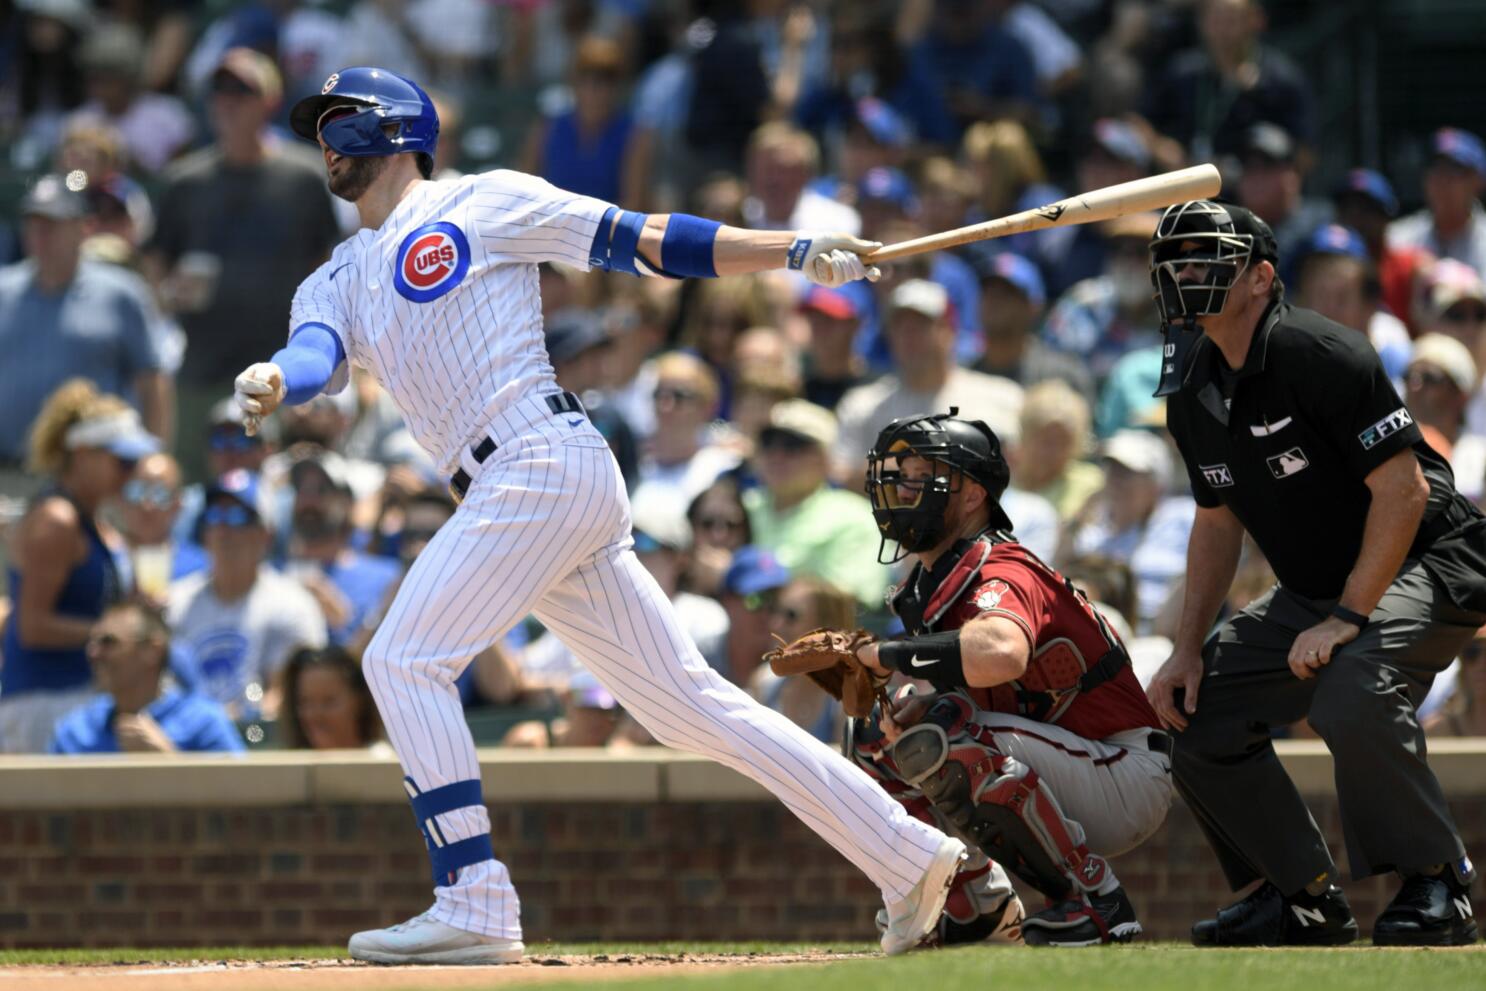 Two new Cubs players who are already paying off after the trade deadline